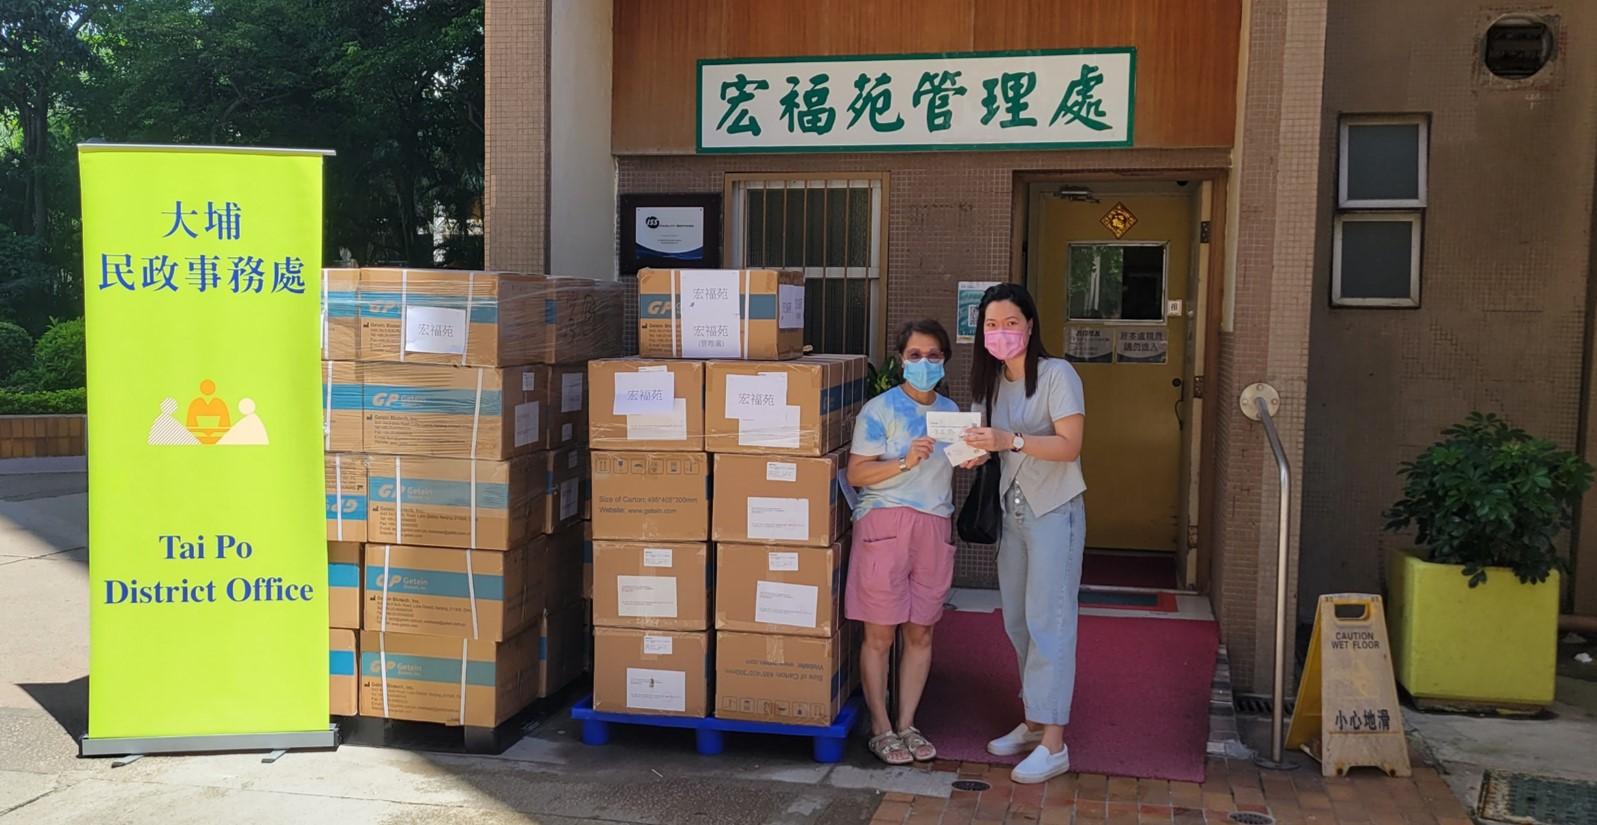 The Tai Po District Office today (July 8) distributed rapid test kits to households, cleansing workers and property management staff living and working in Wang Fuk Court for voluntary testing through the property management company.